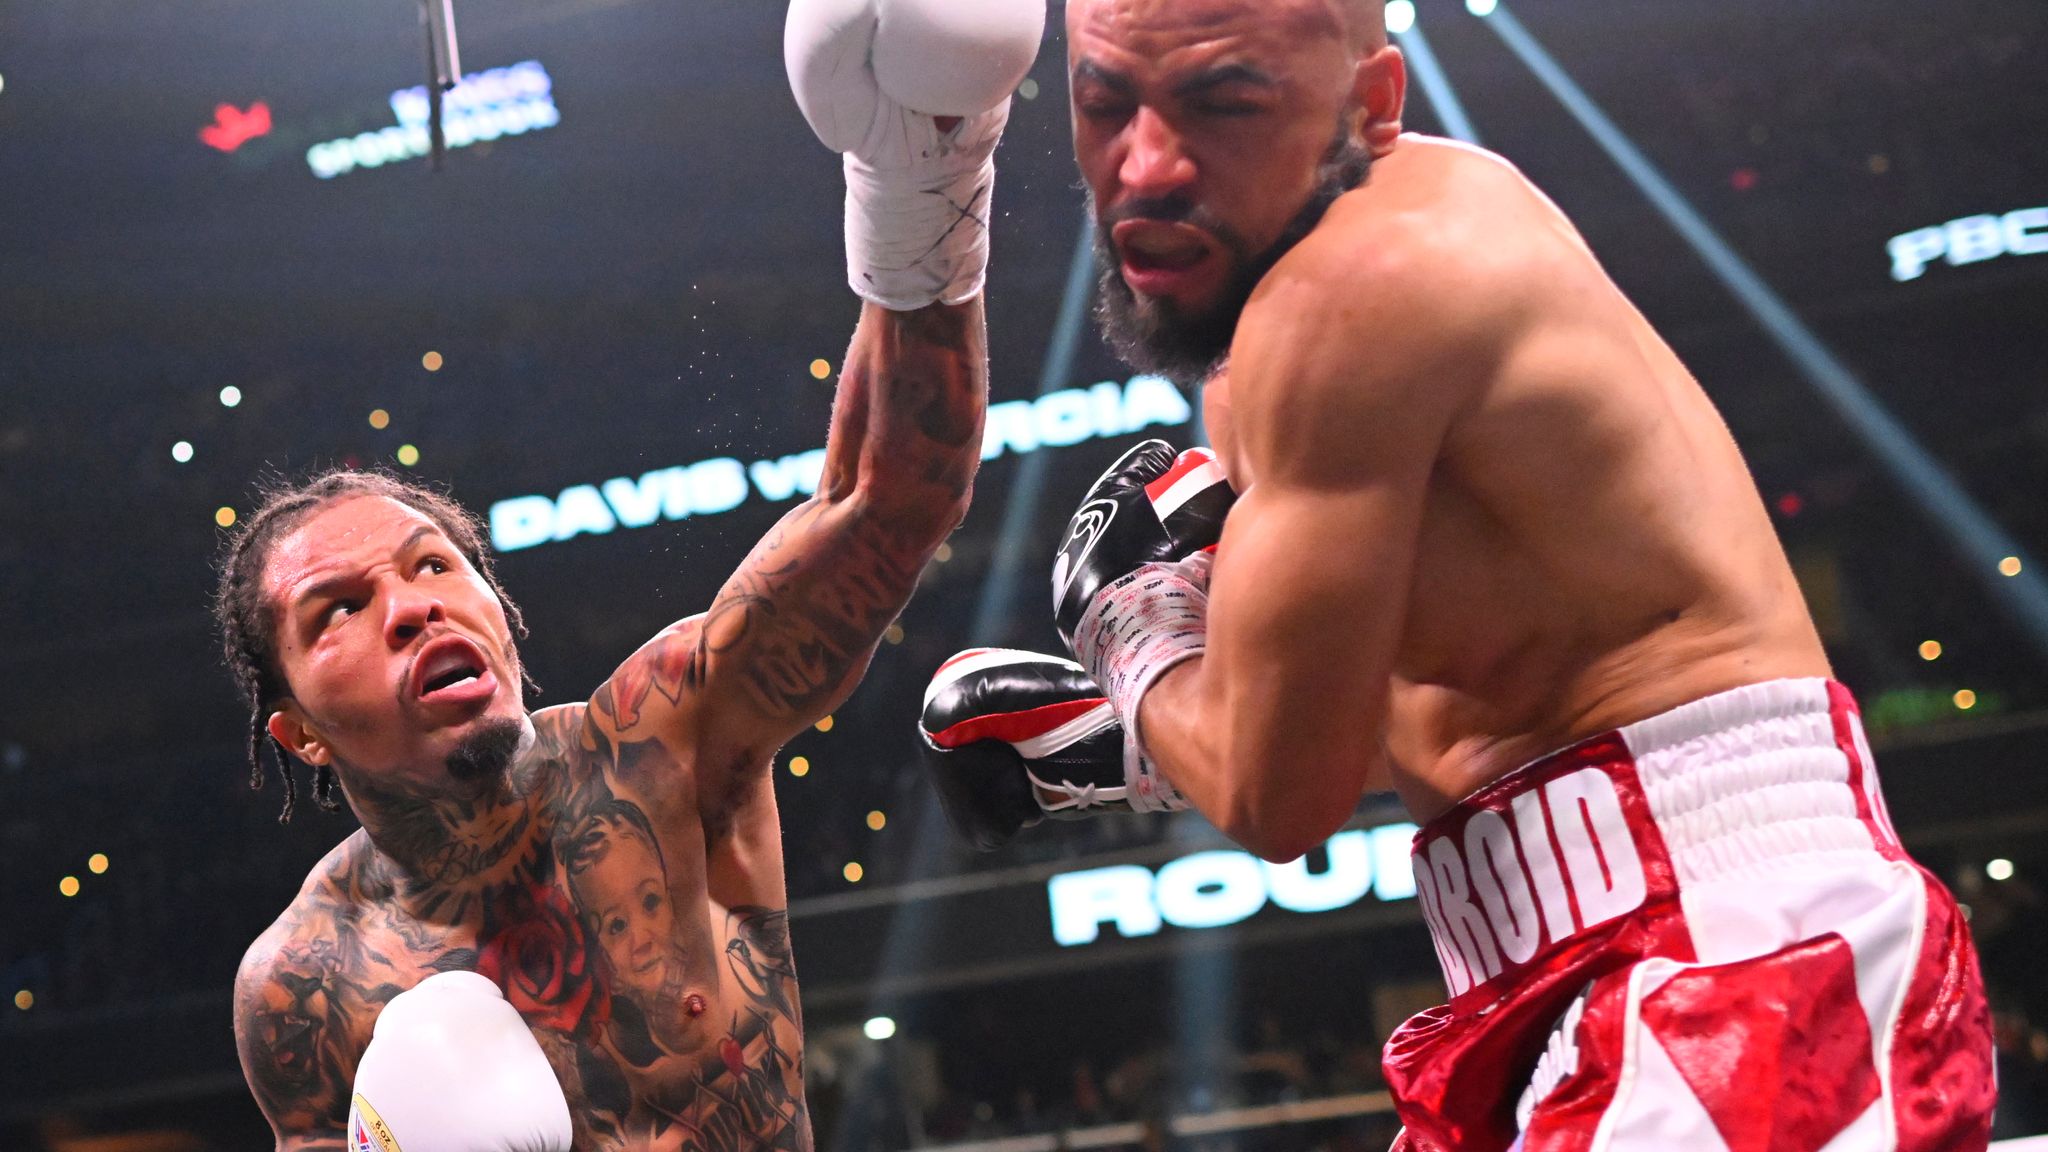 Gervonta Davis retains WBA lightweight title after stopping Hector Luis Garcia in eight rounds via TKO Boxing News Sky Sports